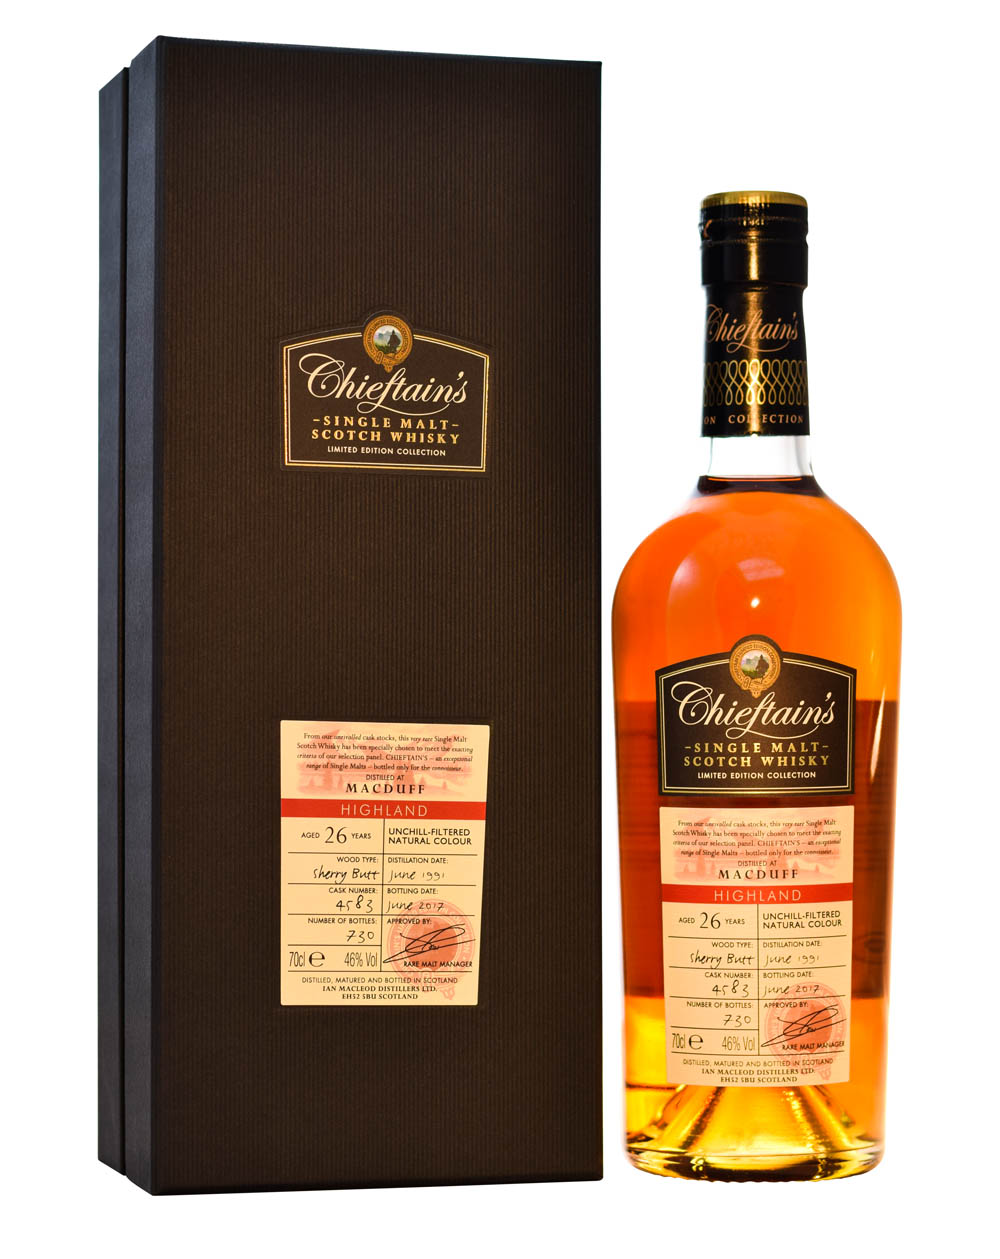 Macduff 1991 Chieftain's (26 Years Old) - Box Musthave Malts MHM